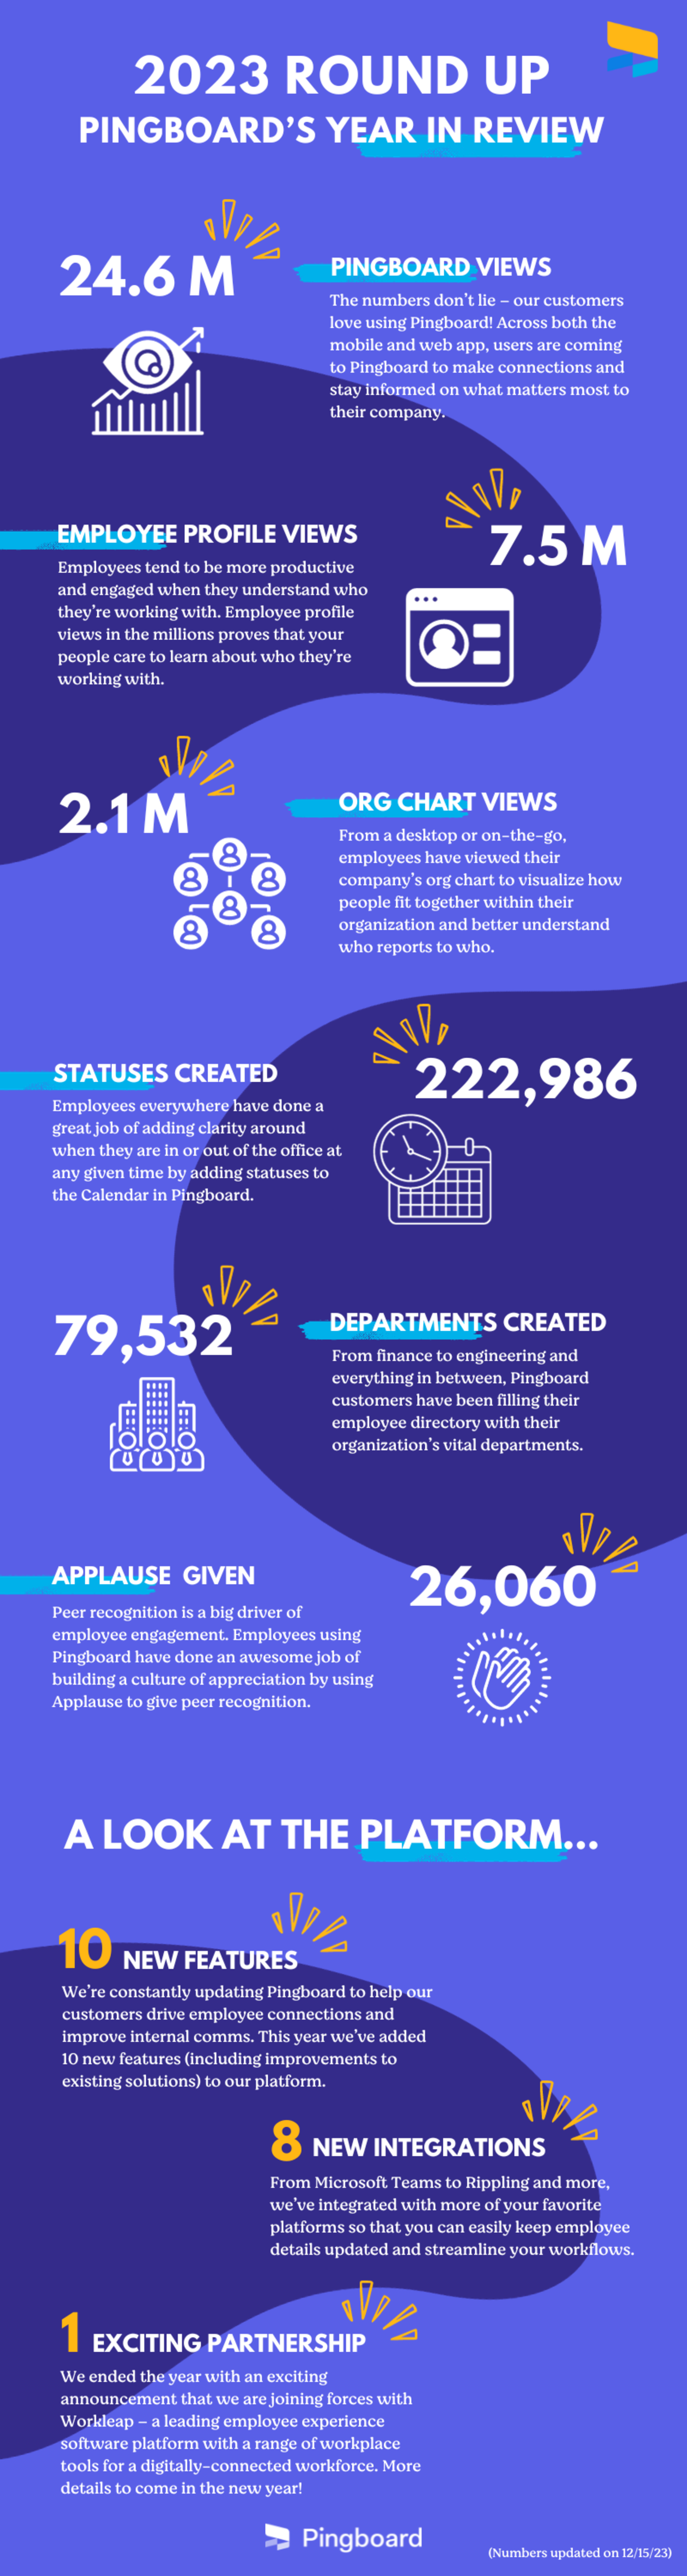 Pingboard's 2023 year in review